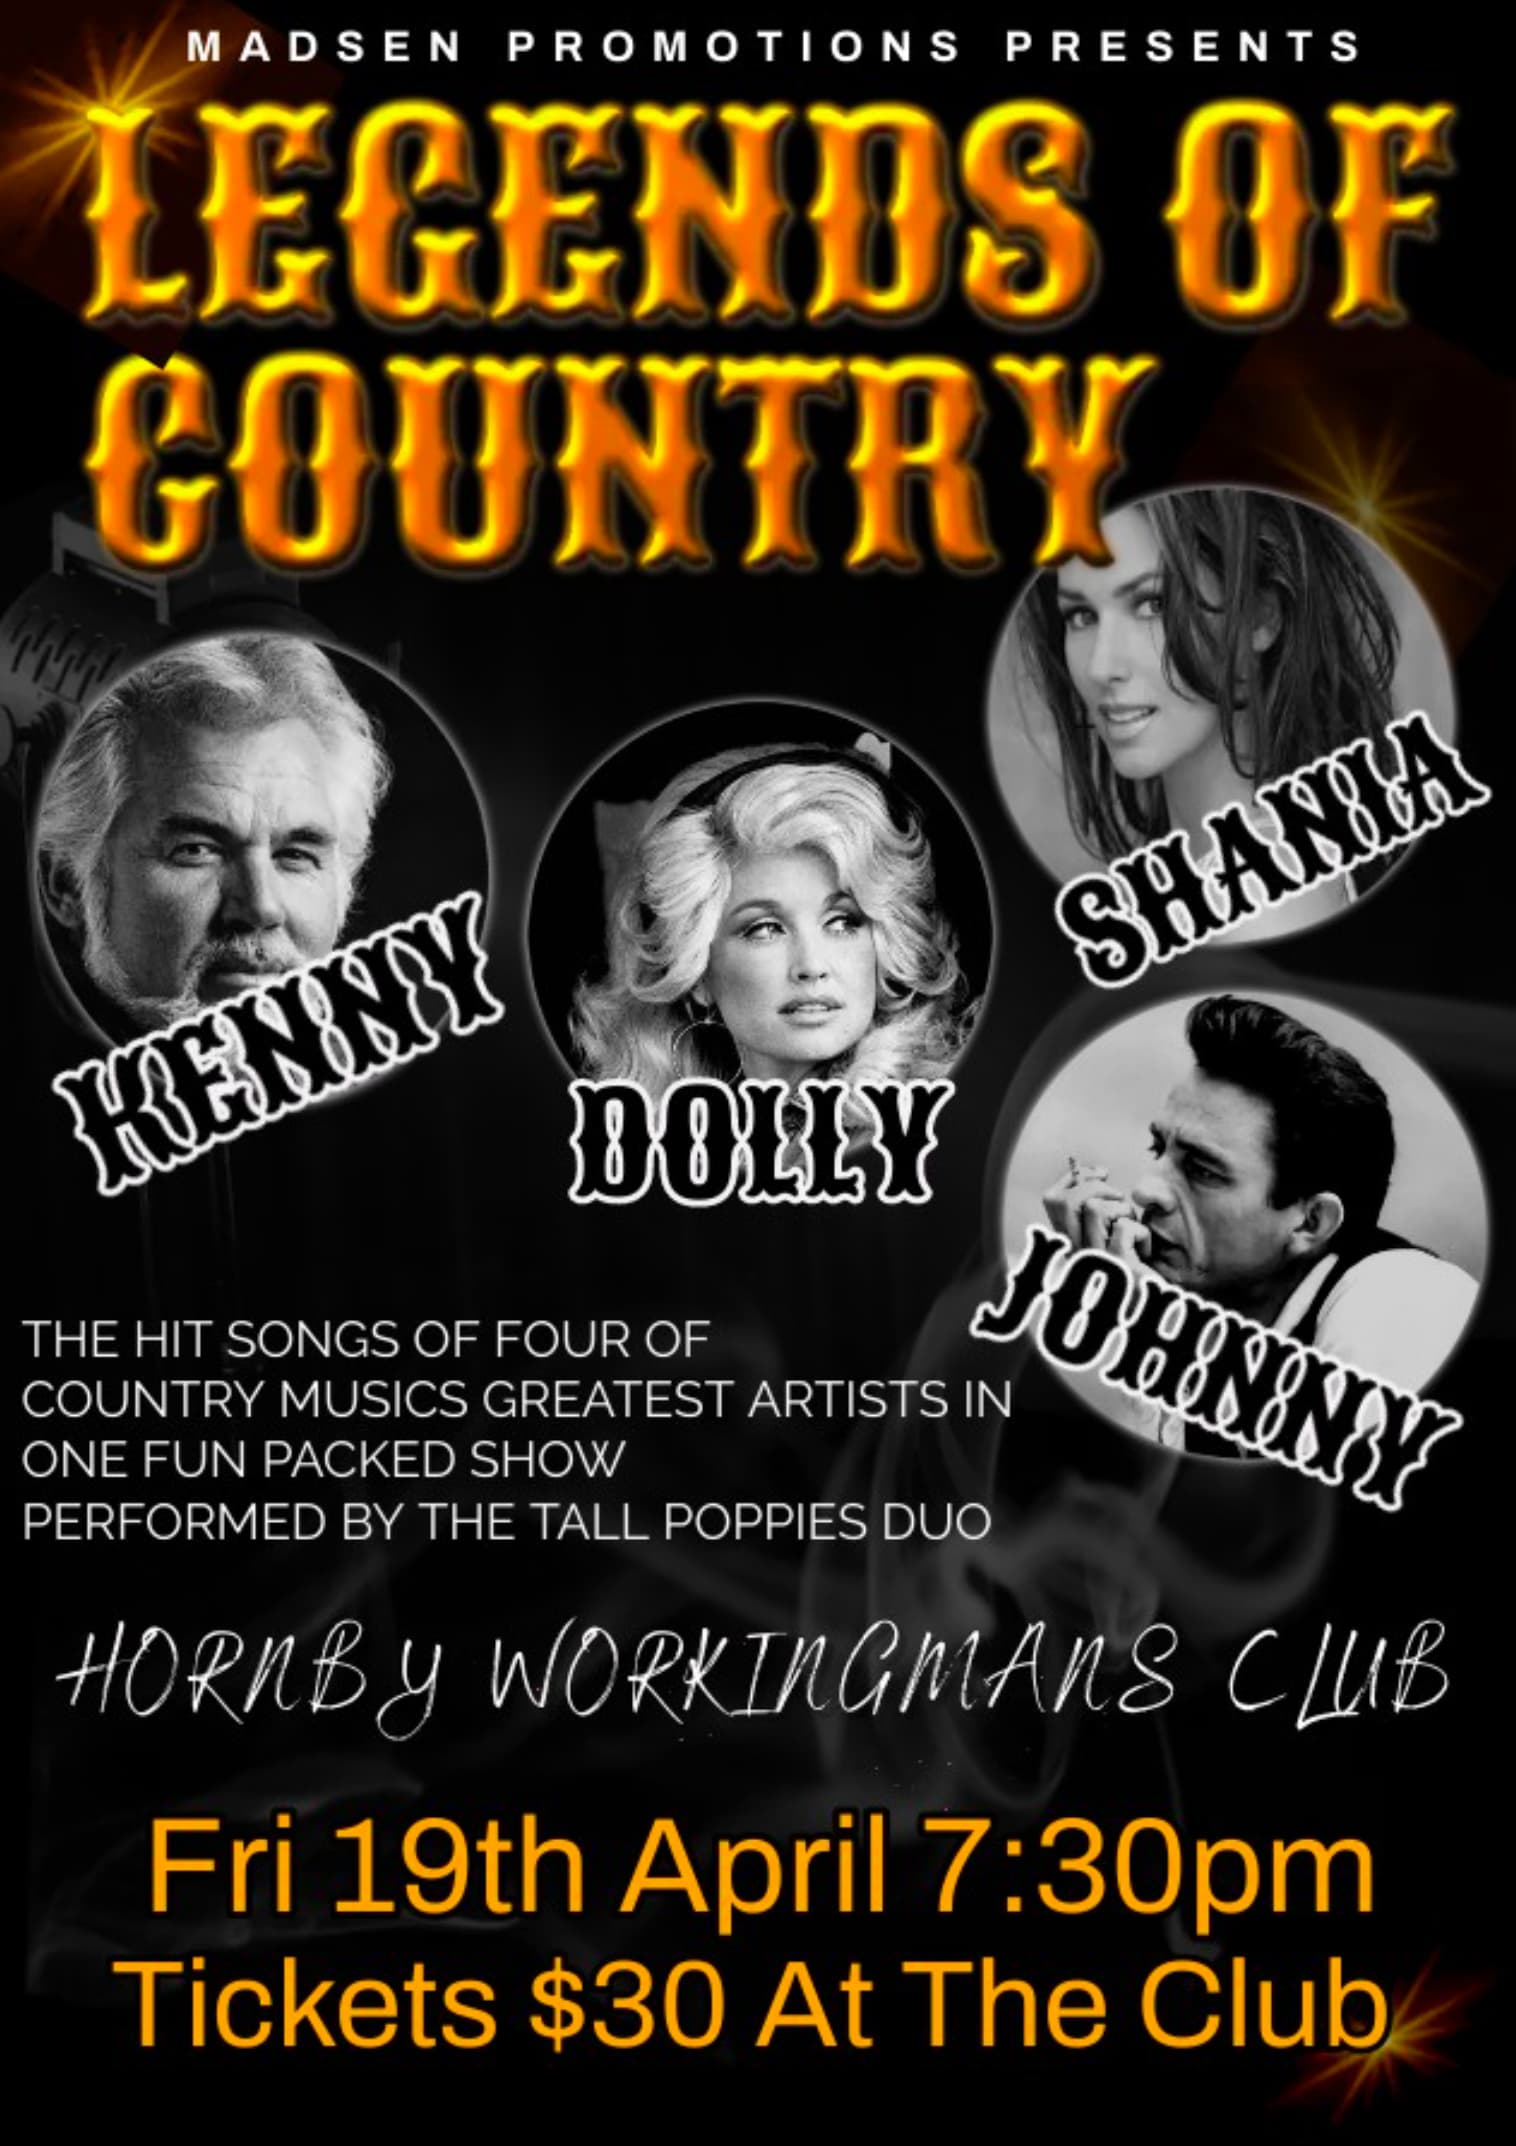 country music poster